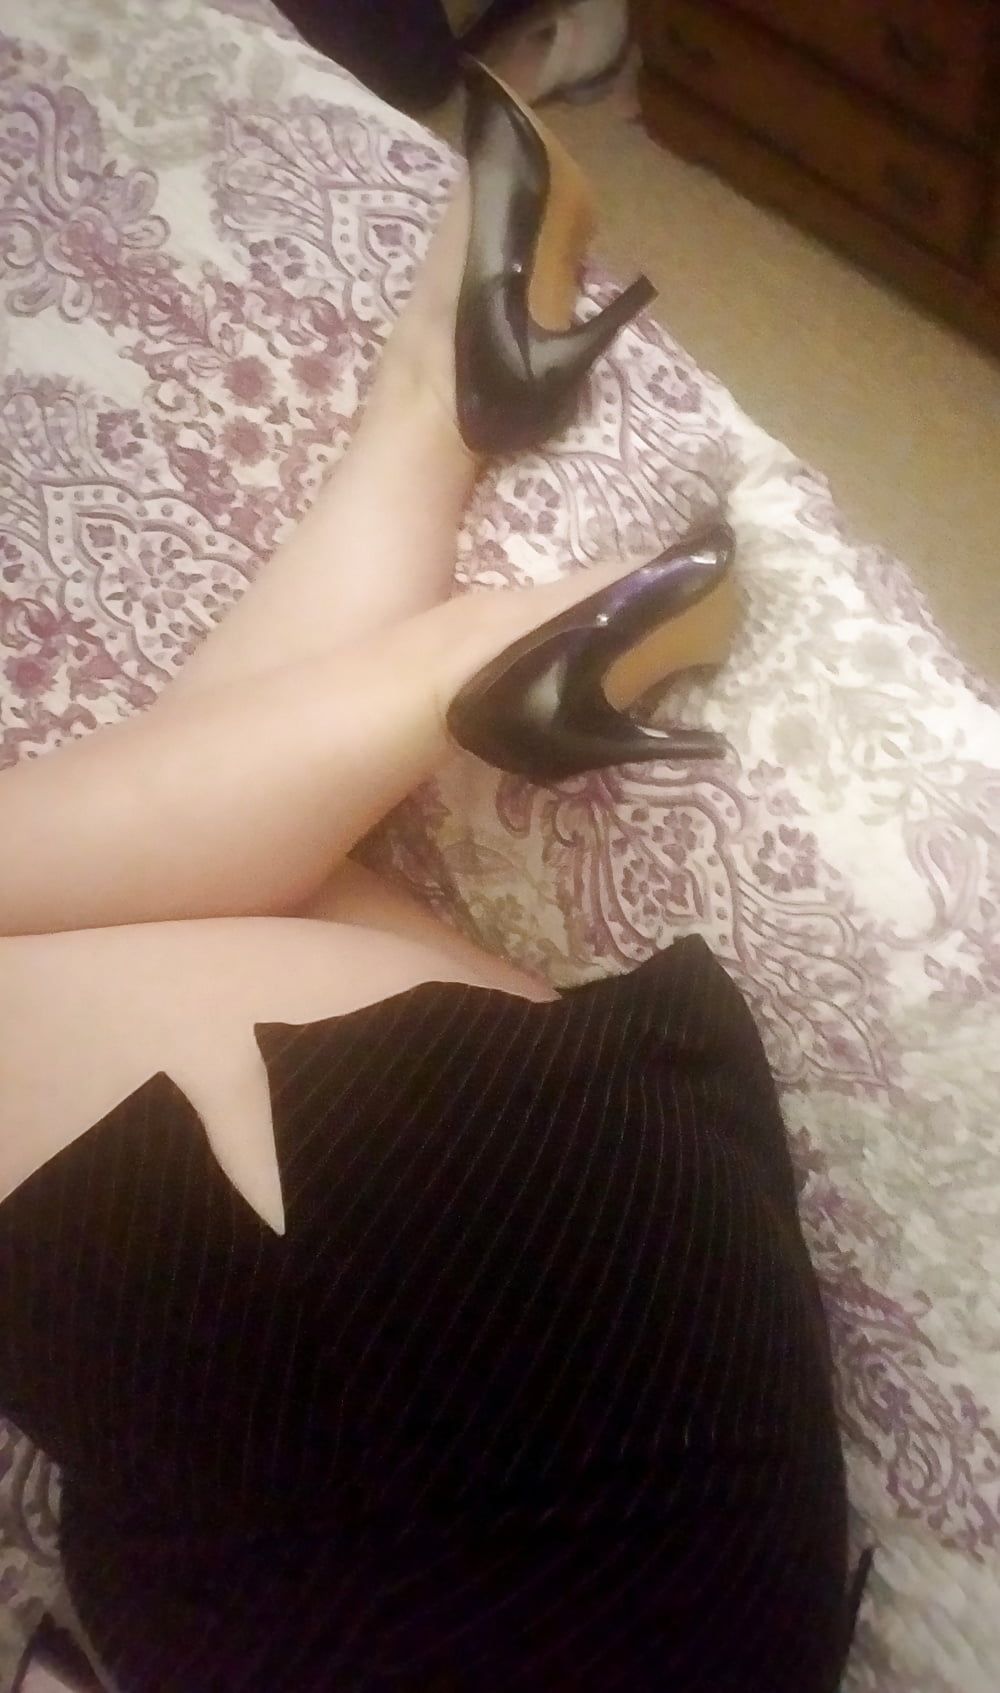 Feet, Legs, Heels & Boots of the Sweet Sexy Housewife  #7